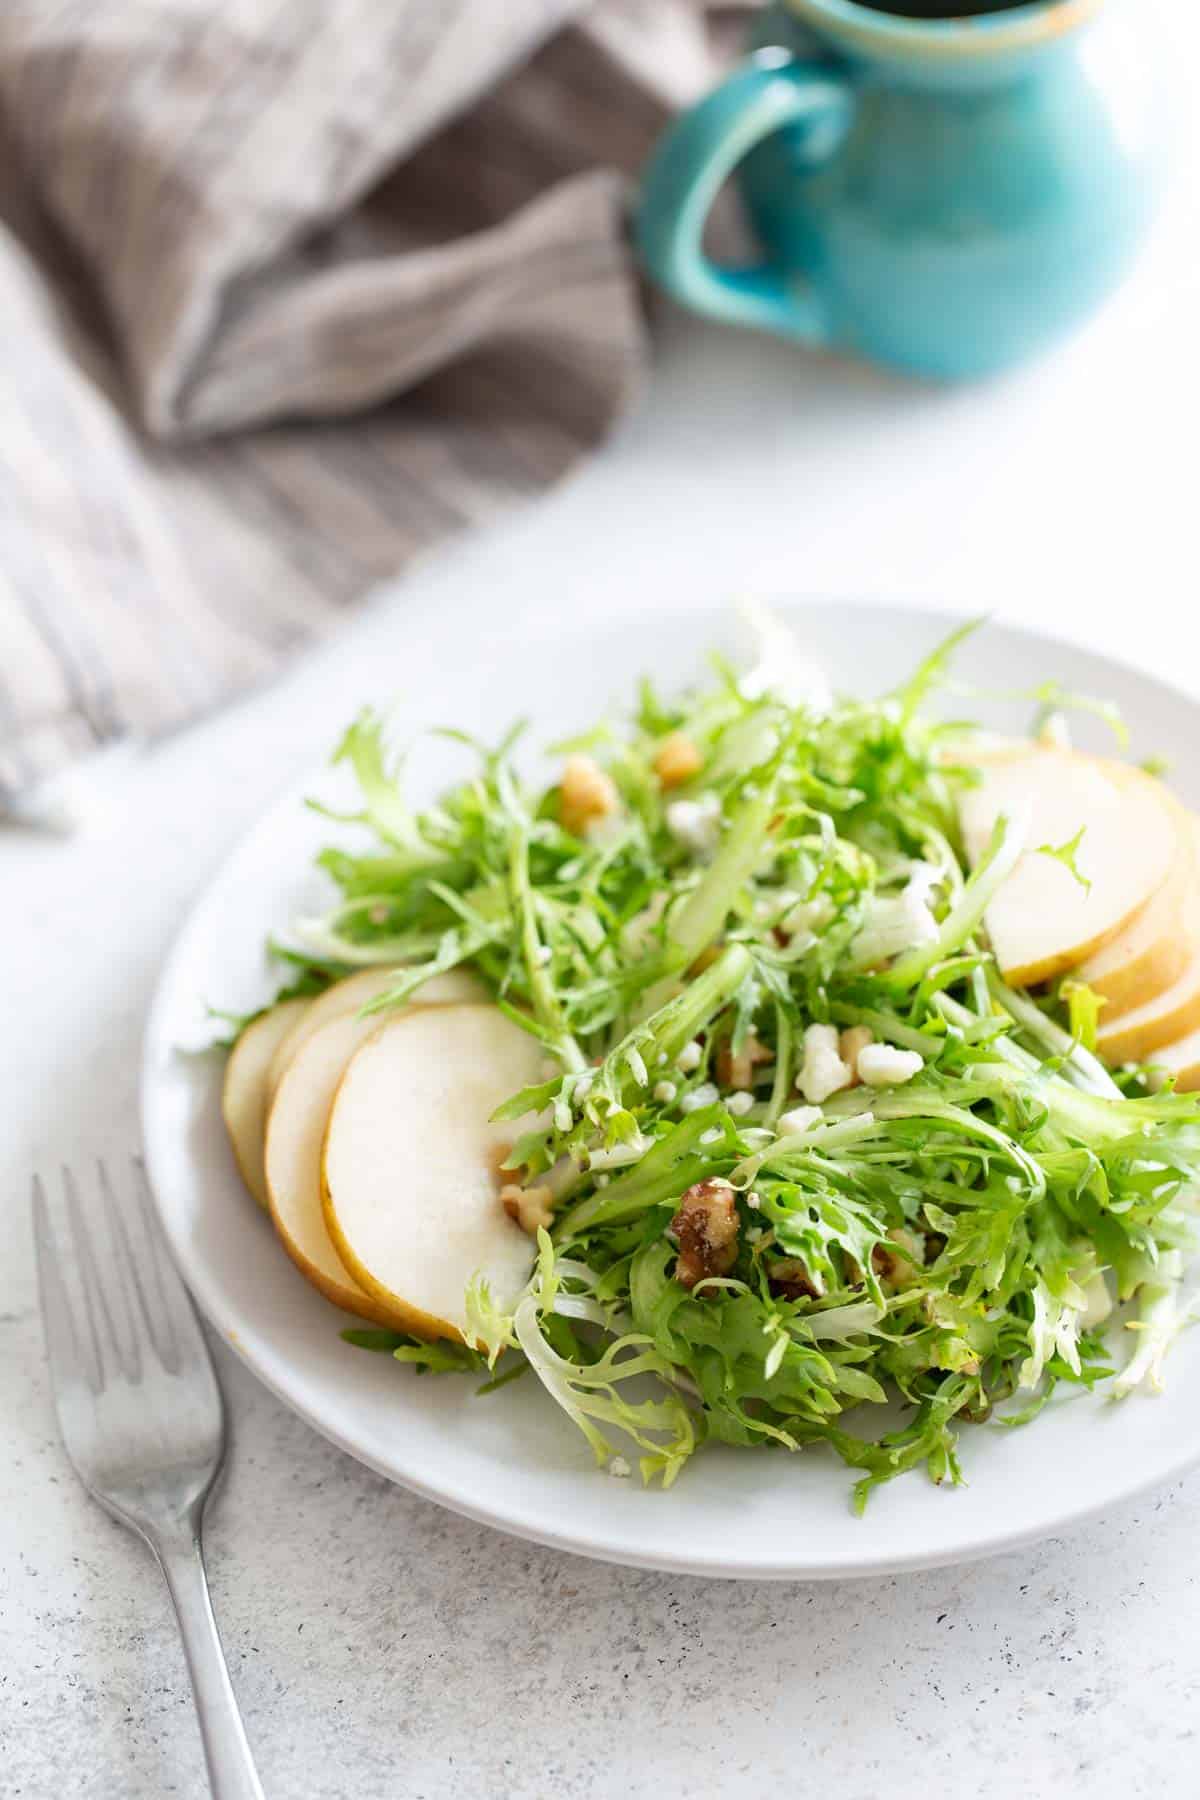 Frisée Salad with Pears